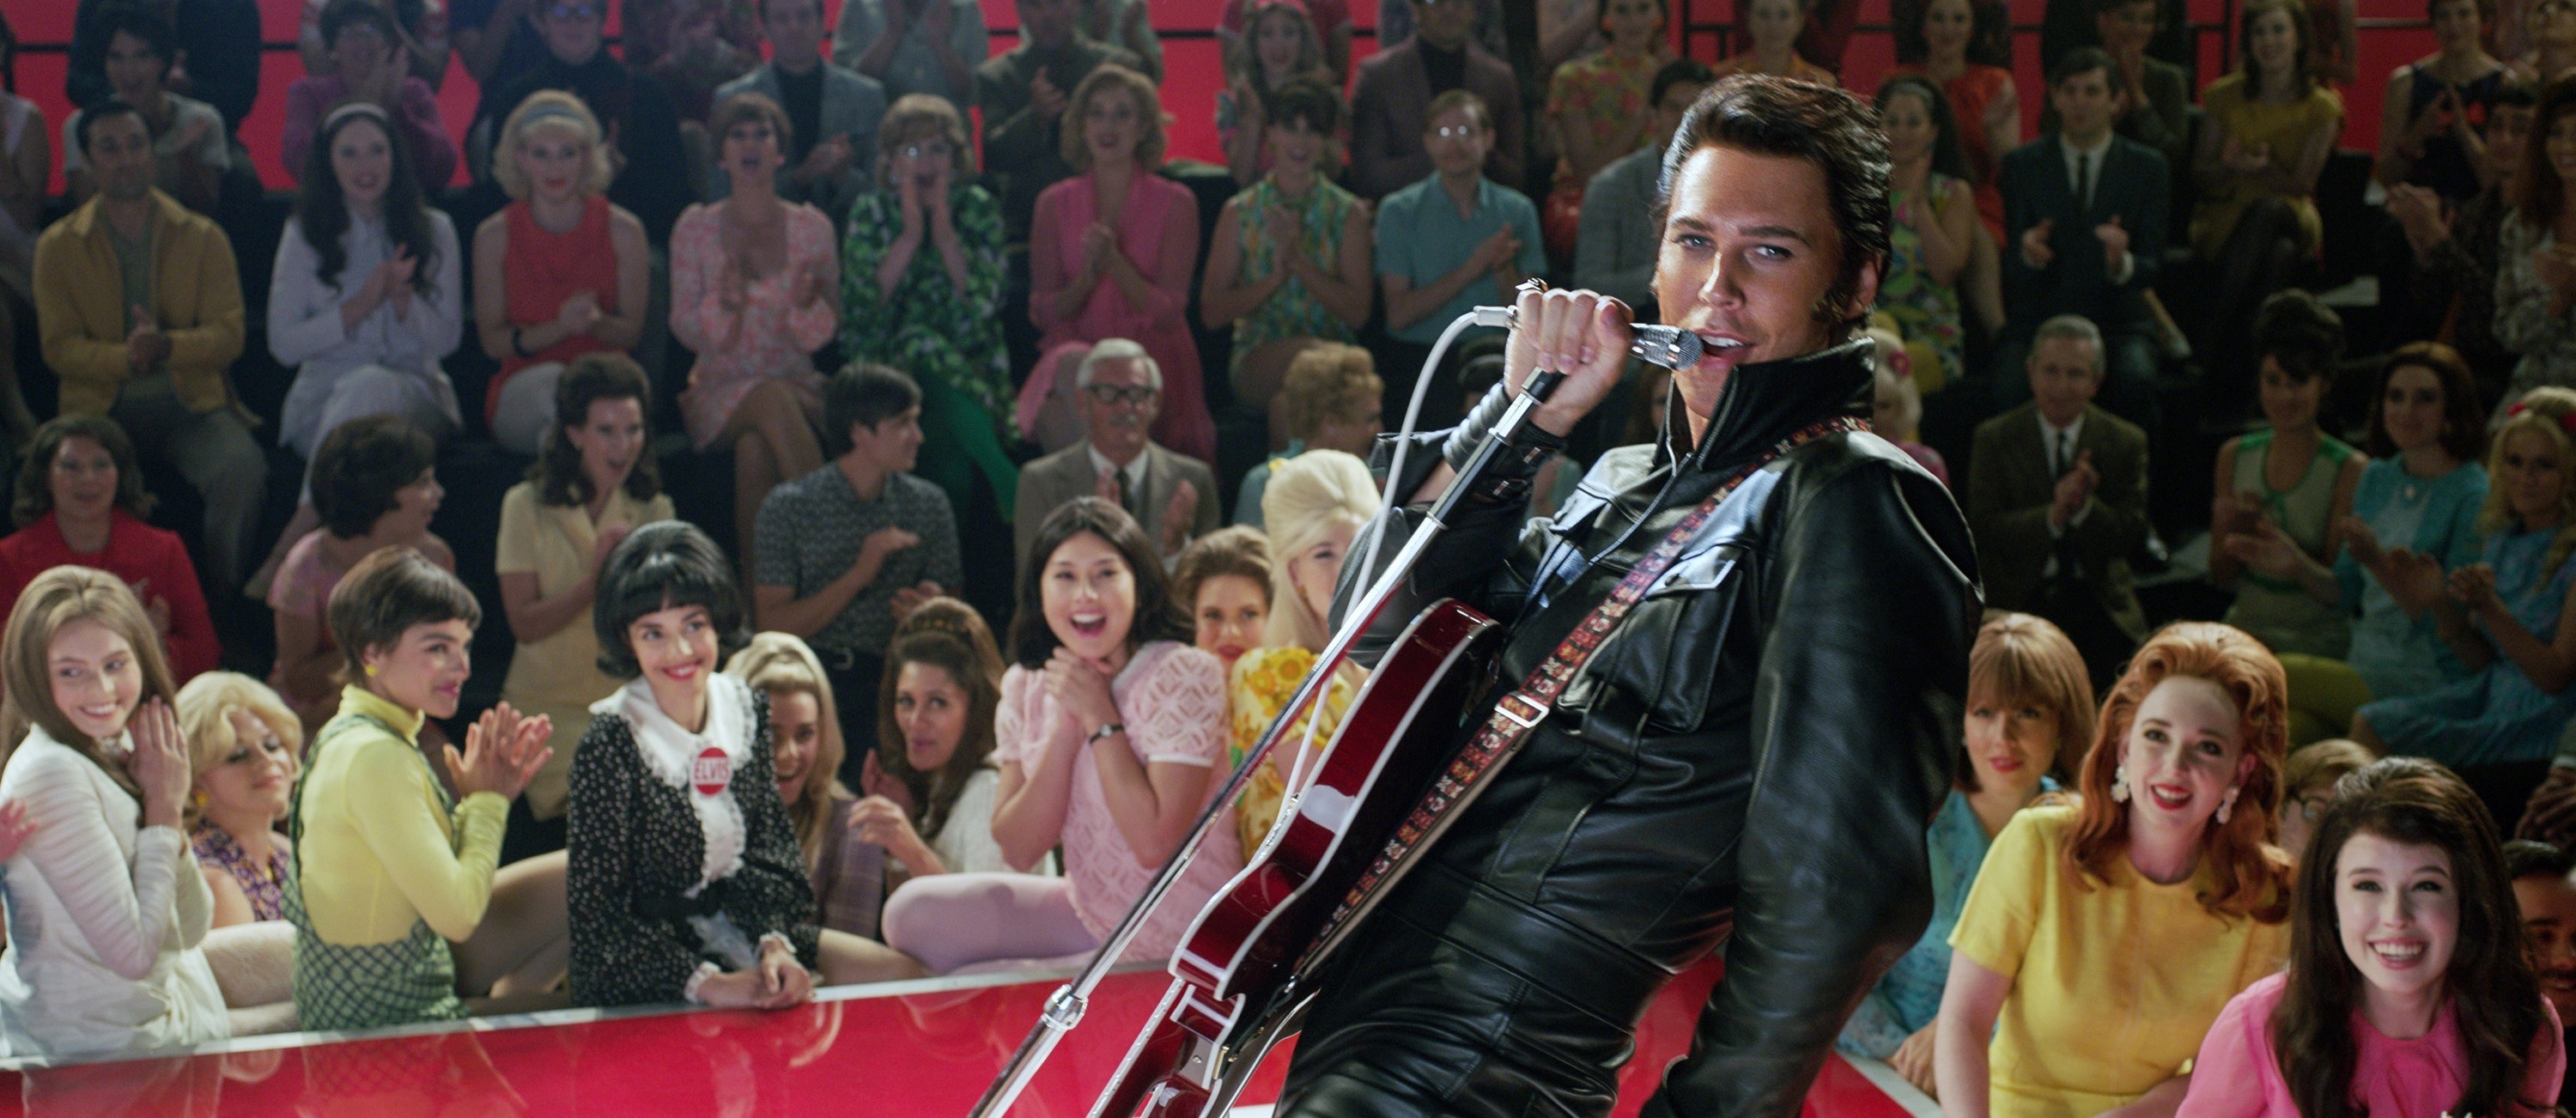 Austin performing onstage as Elvis in the film in a full leather outfit and a guitar slung over his shoulder